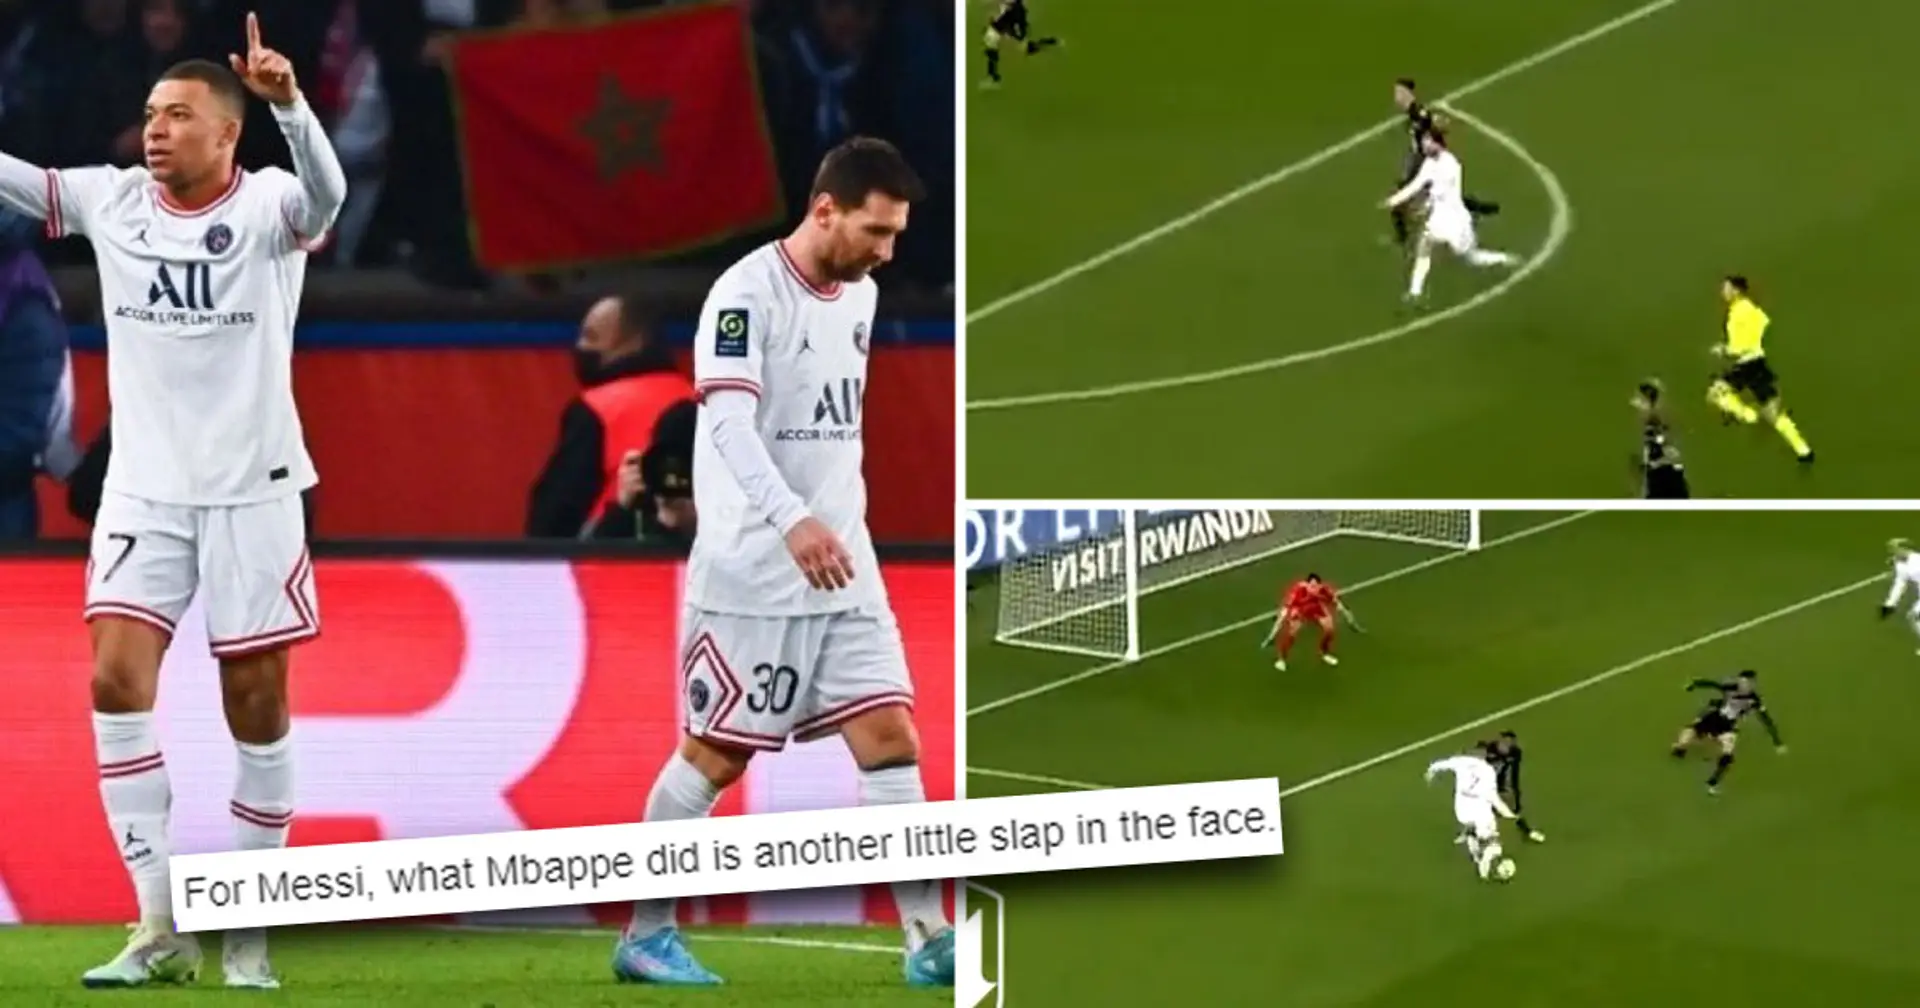 Messi appears frustrated at 'arrogant' Mbappe who refuses to cut back and goes for goal himself 